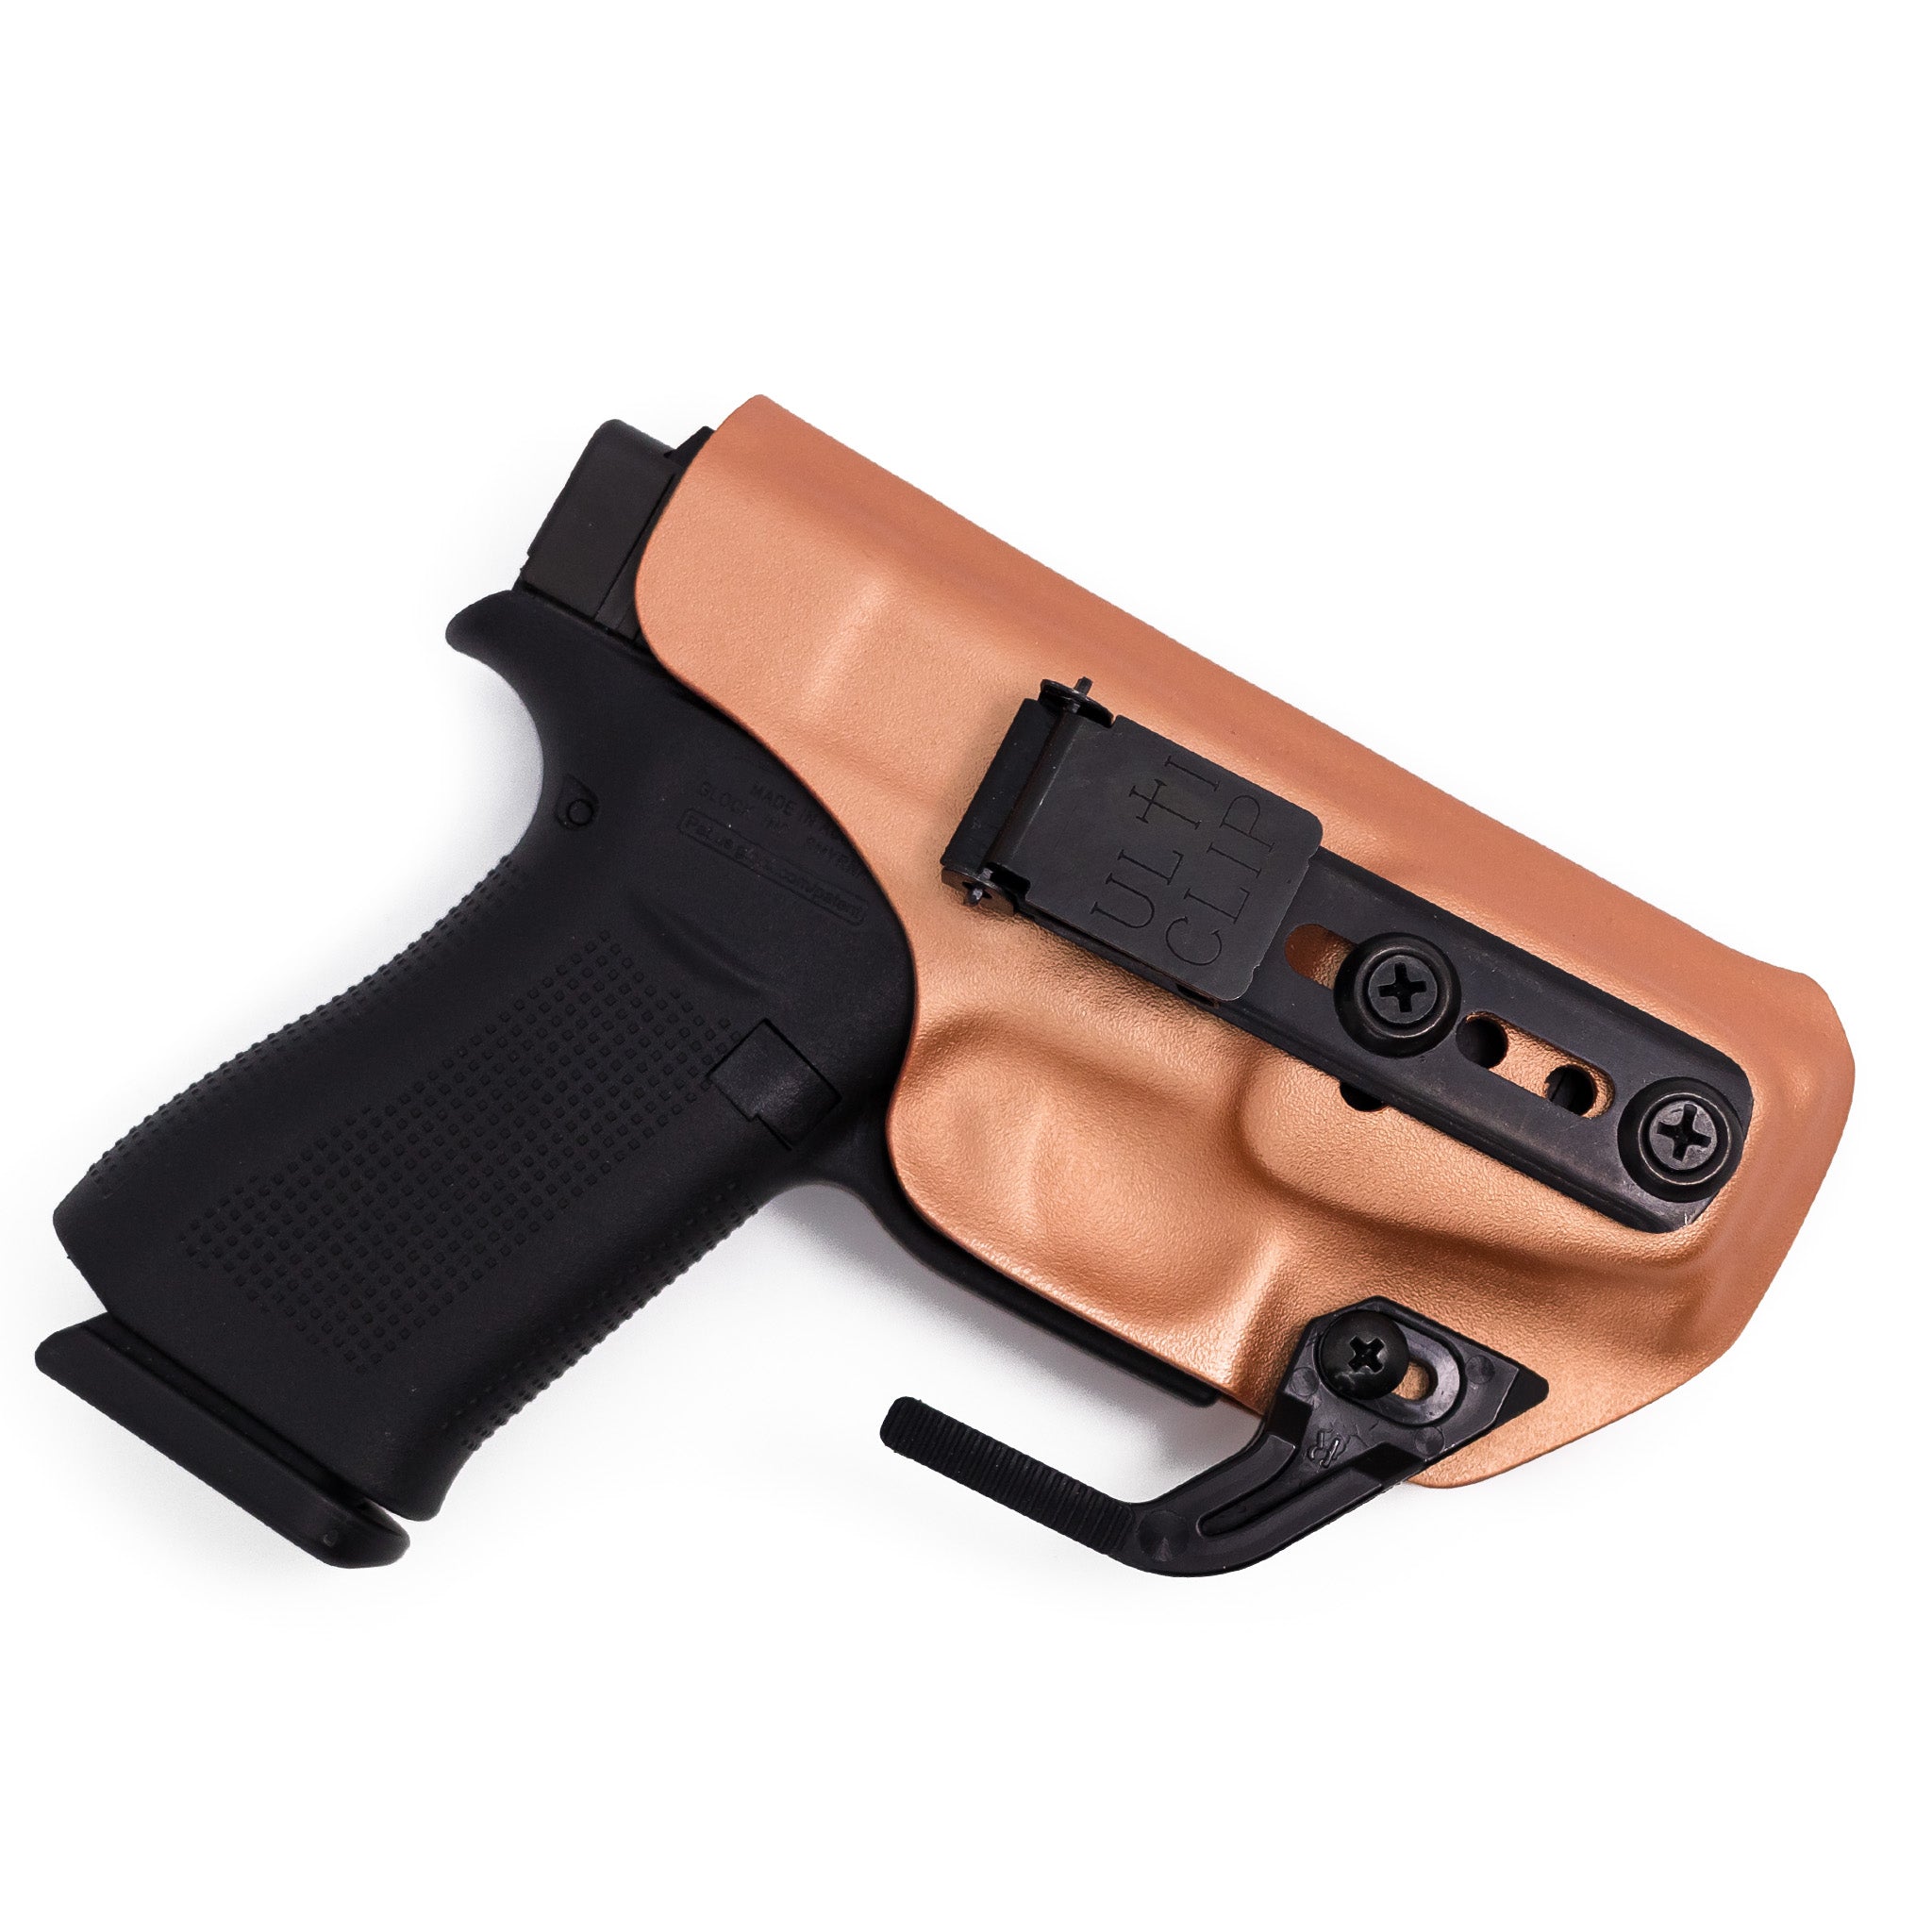 Ulticlip 3 for Concealed Carry Holsters - Flashbang Holsters